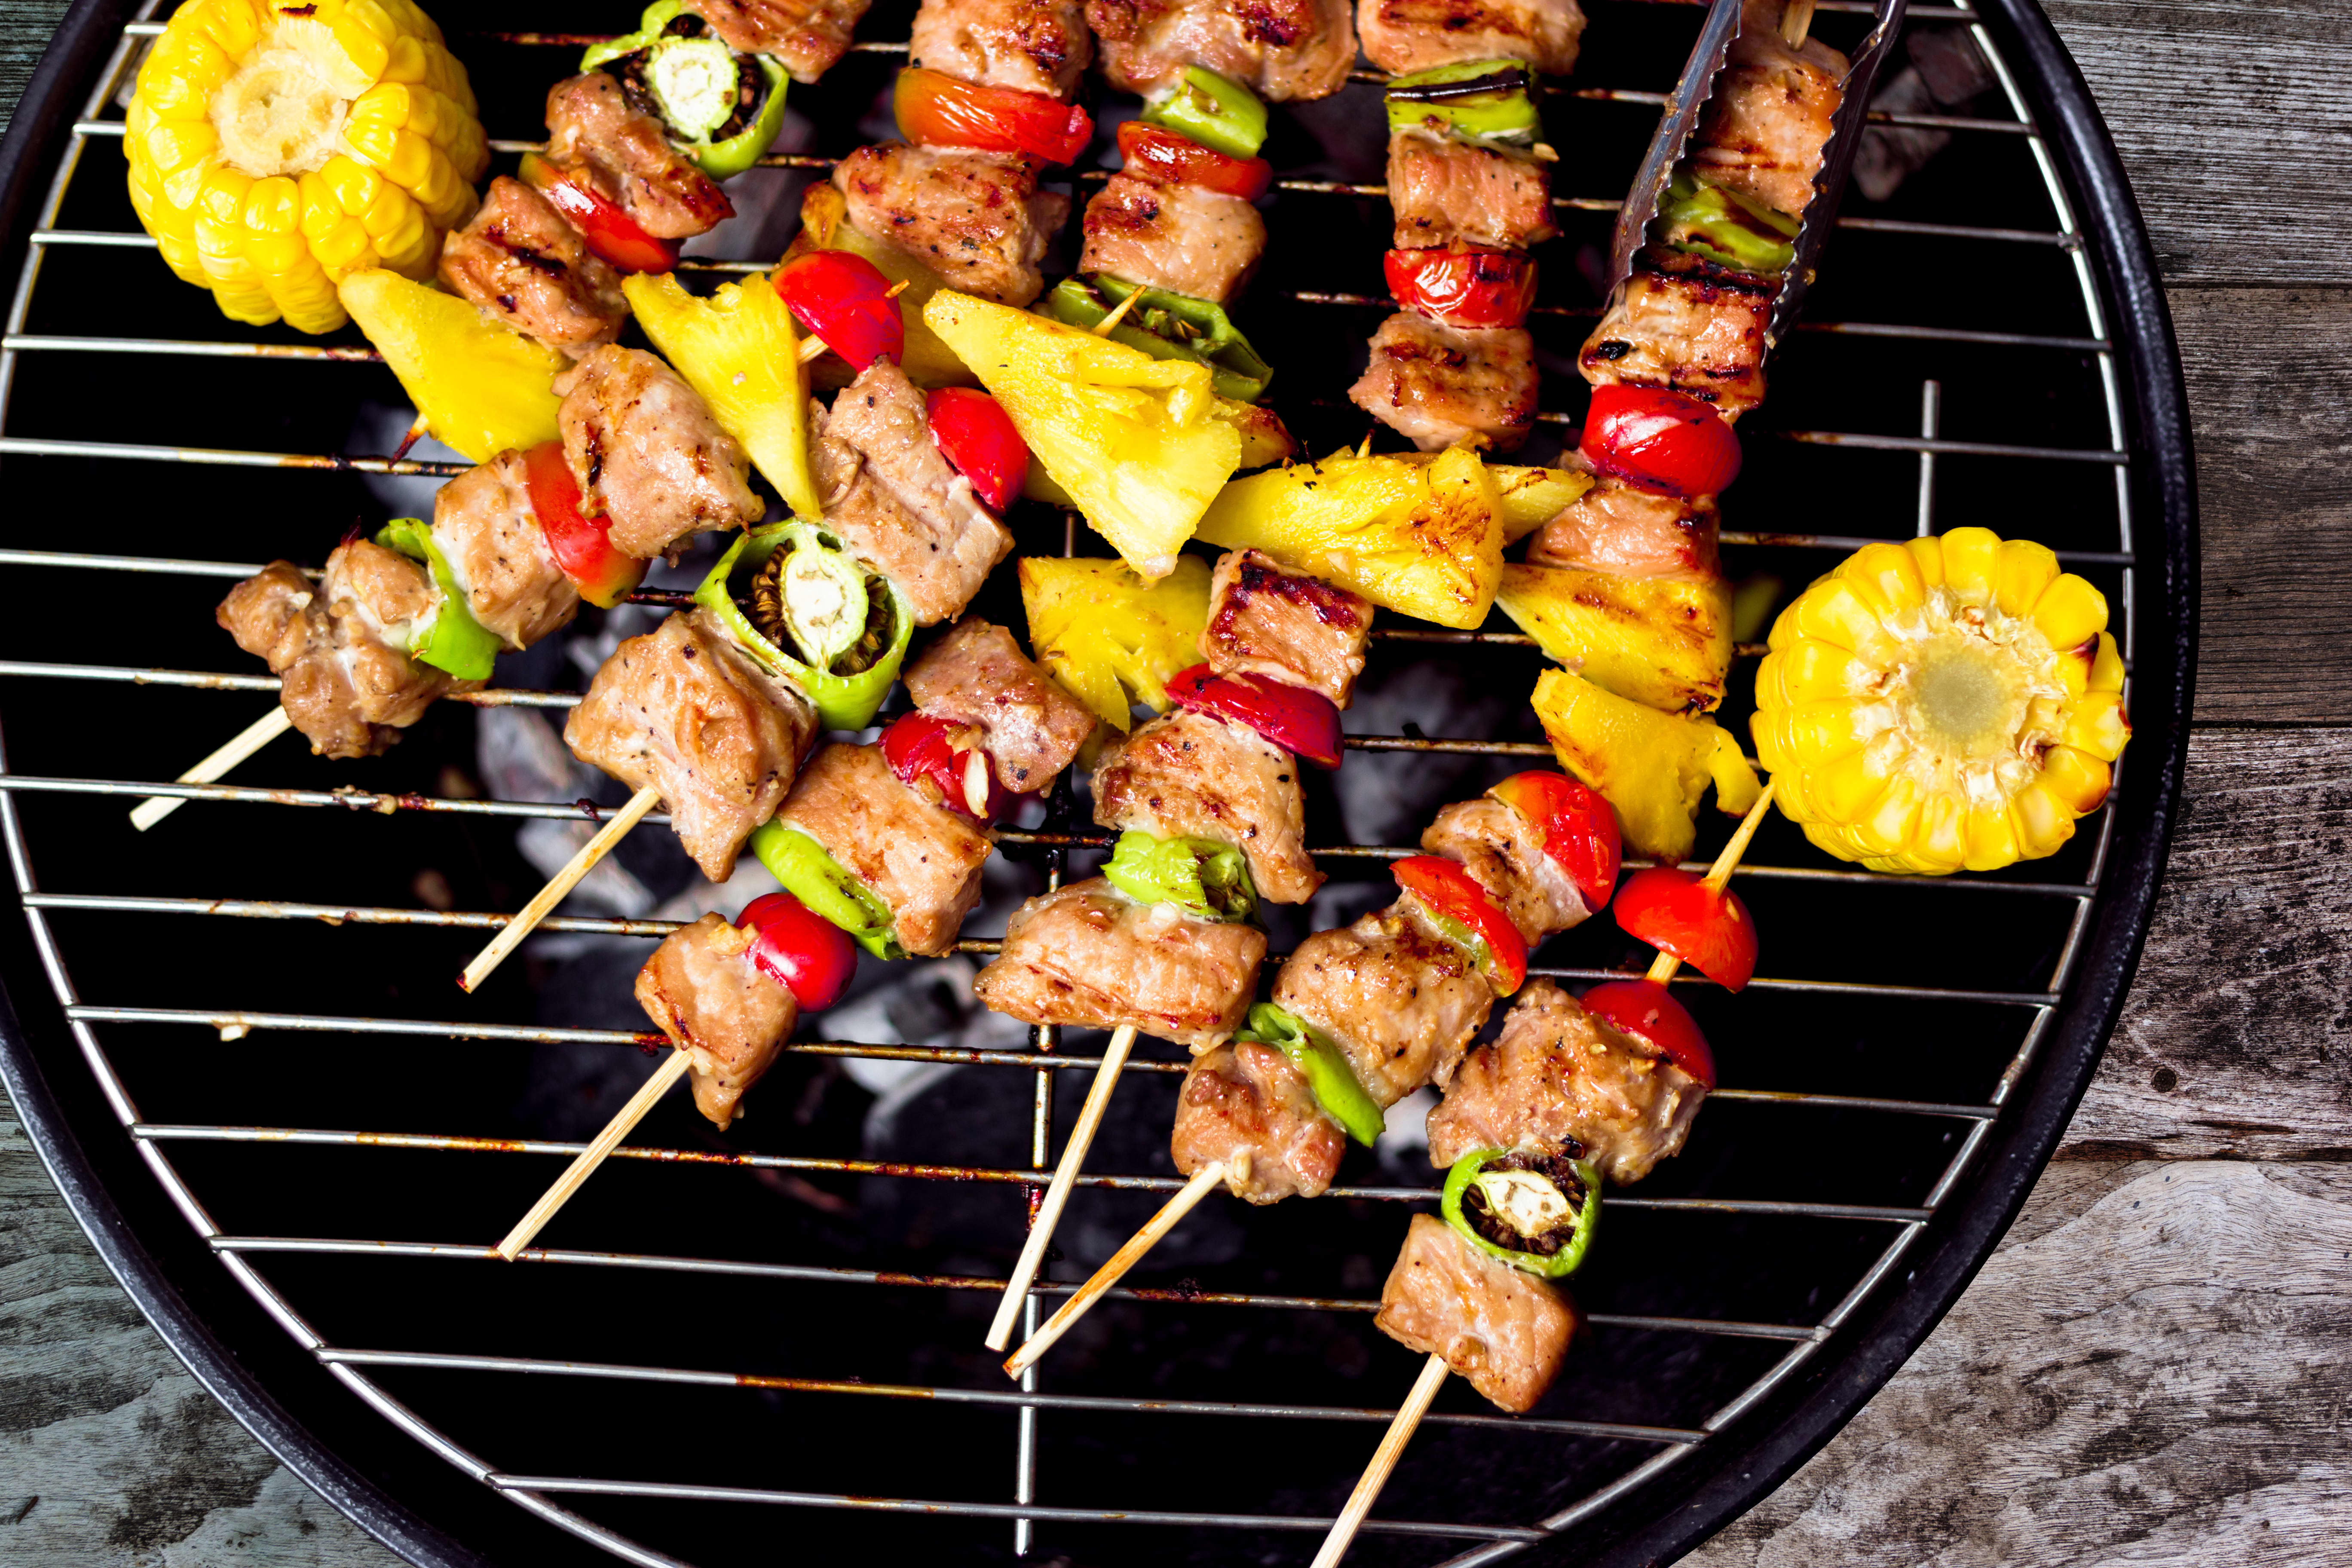 7 Tips That Will Help You Grill Like a Pro